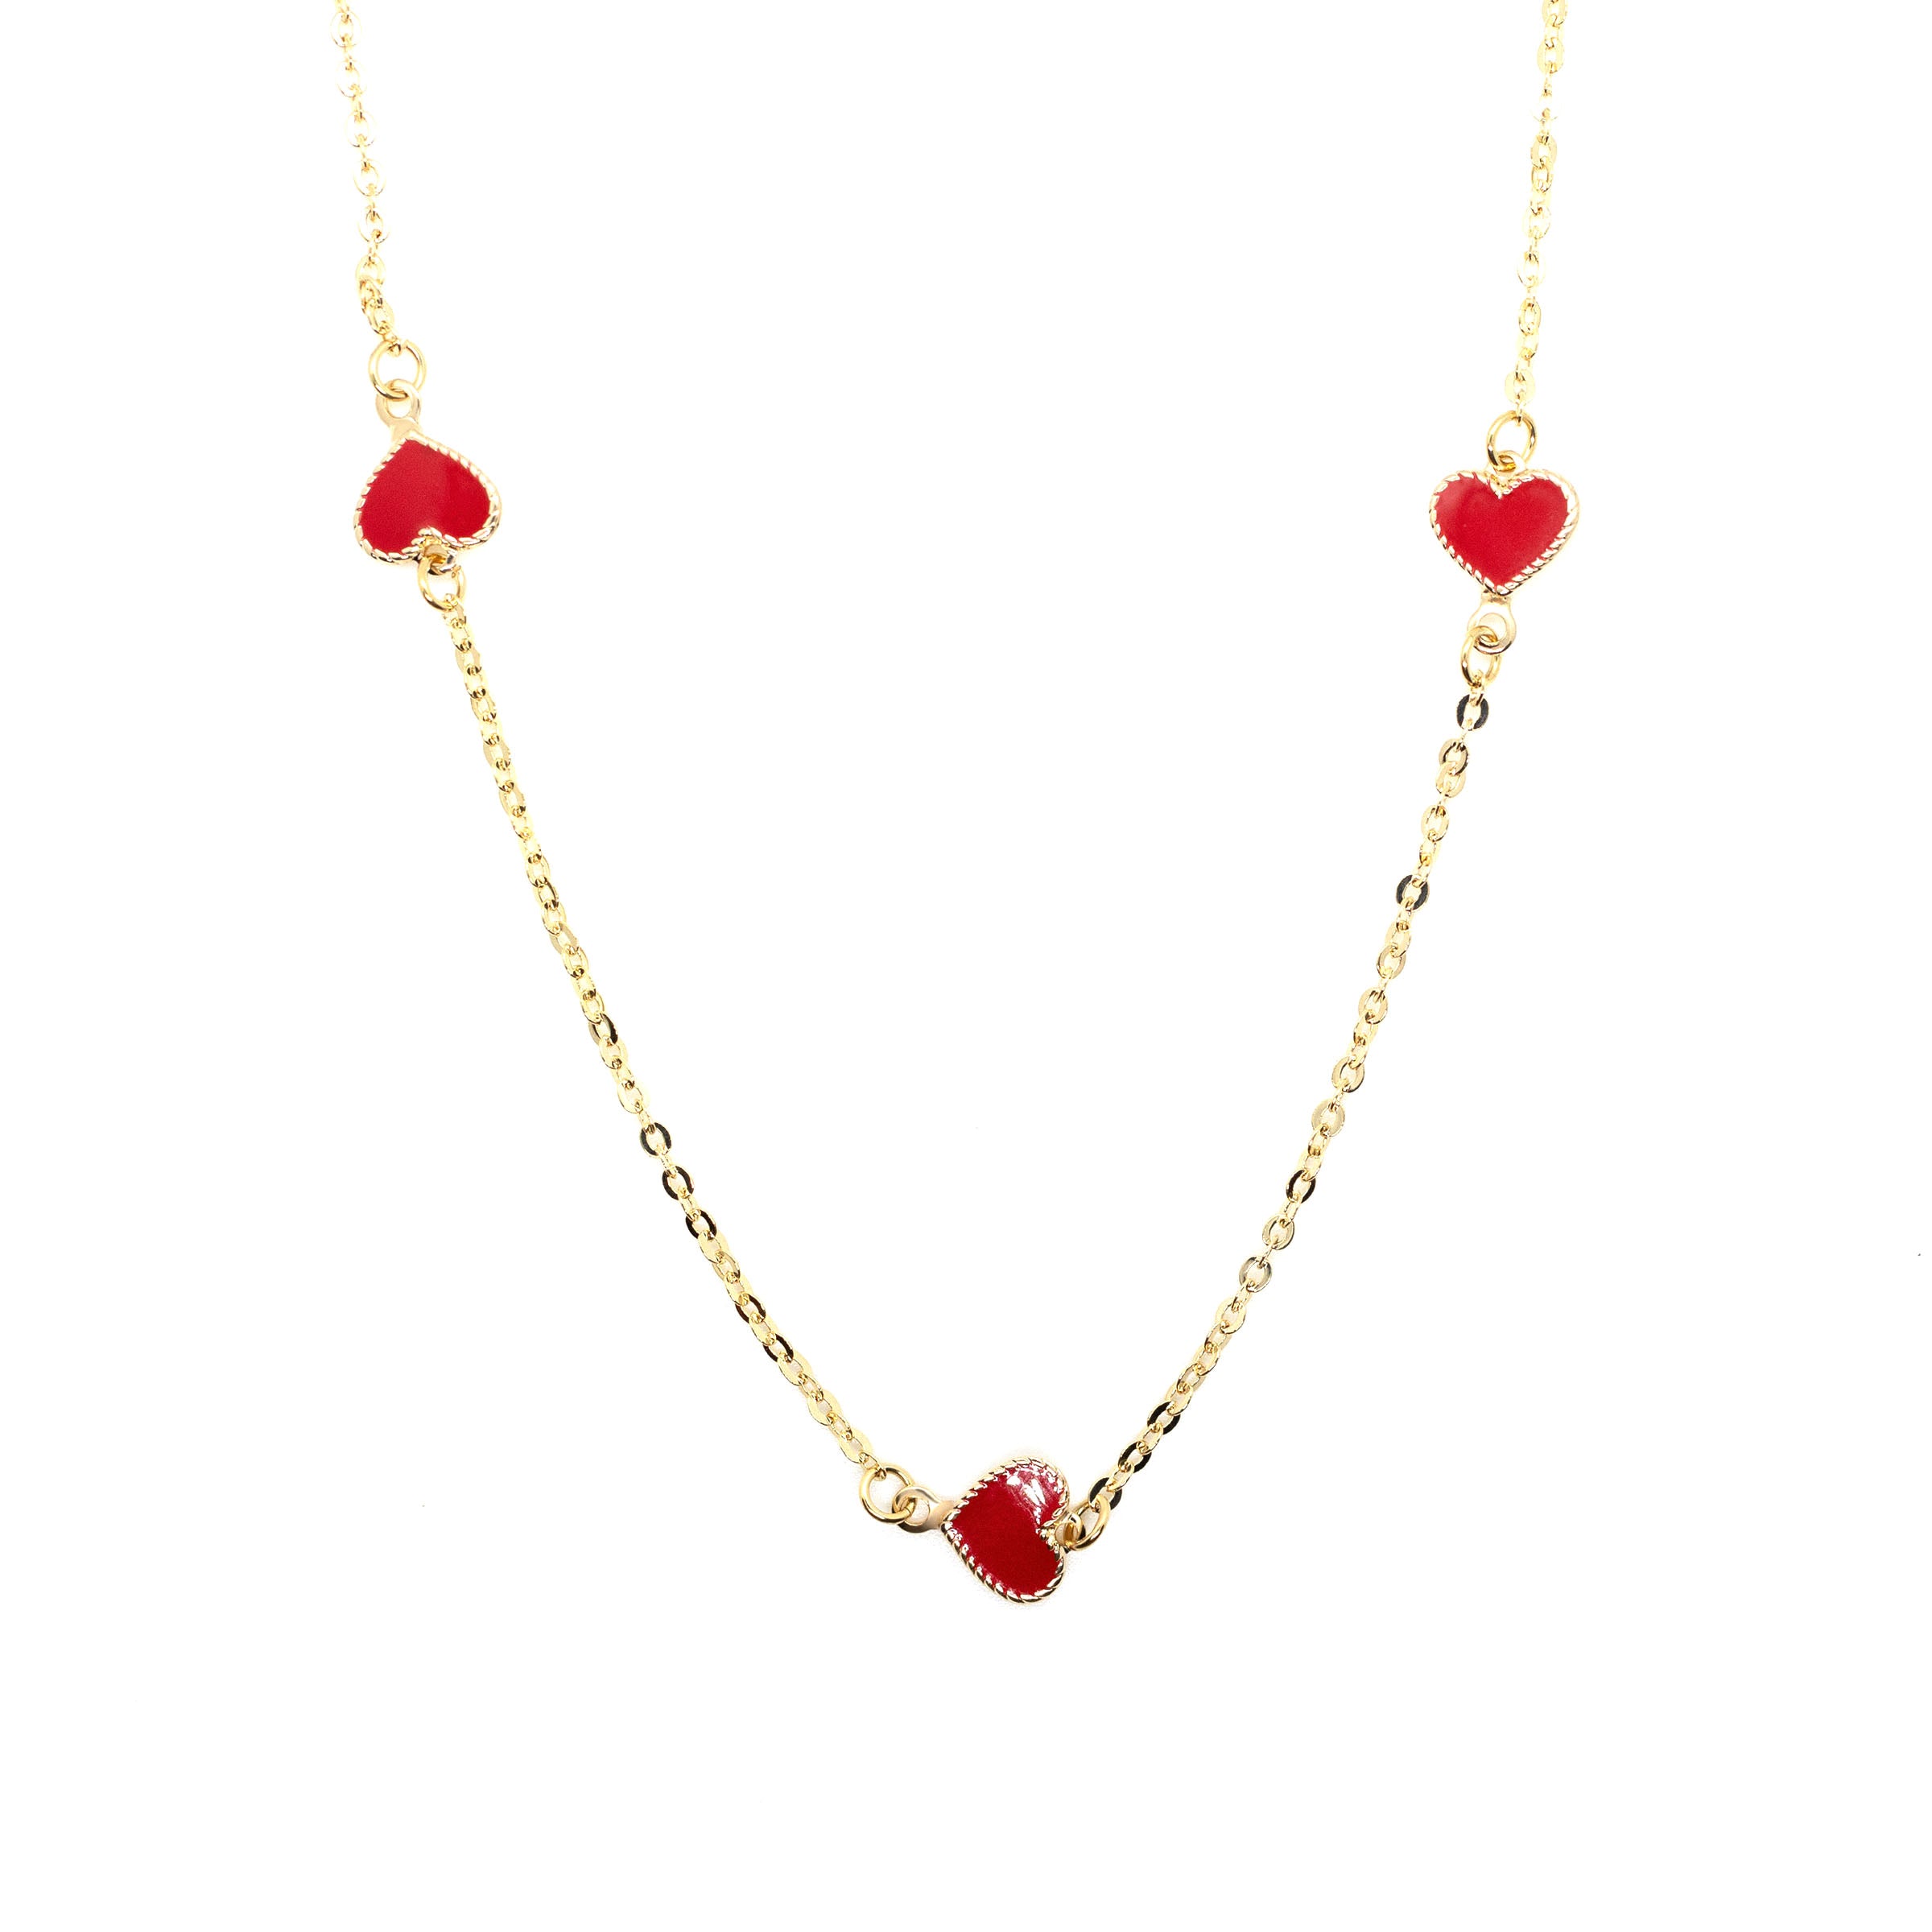 Camilla Petite Floating Heart Necklace N317